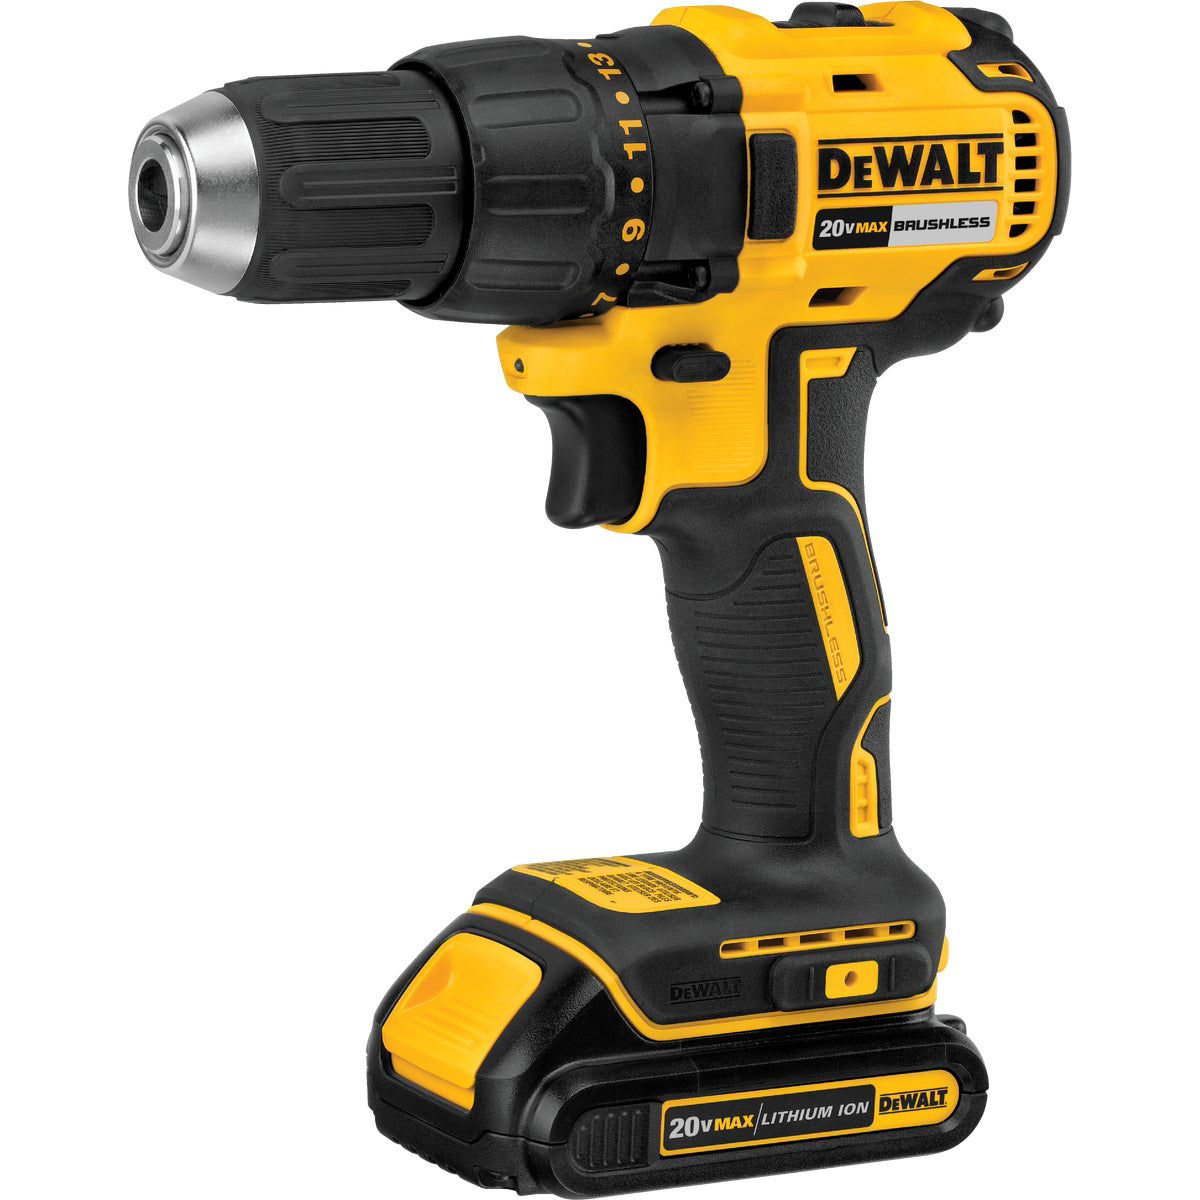 DEWALT 20V MAX Brushless 1/2 In. Compact Cordless Drill/Driver Kit with 2.0  Ah Battery & Charger